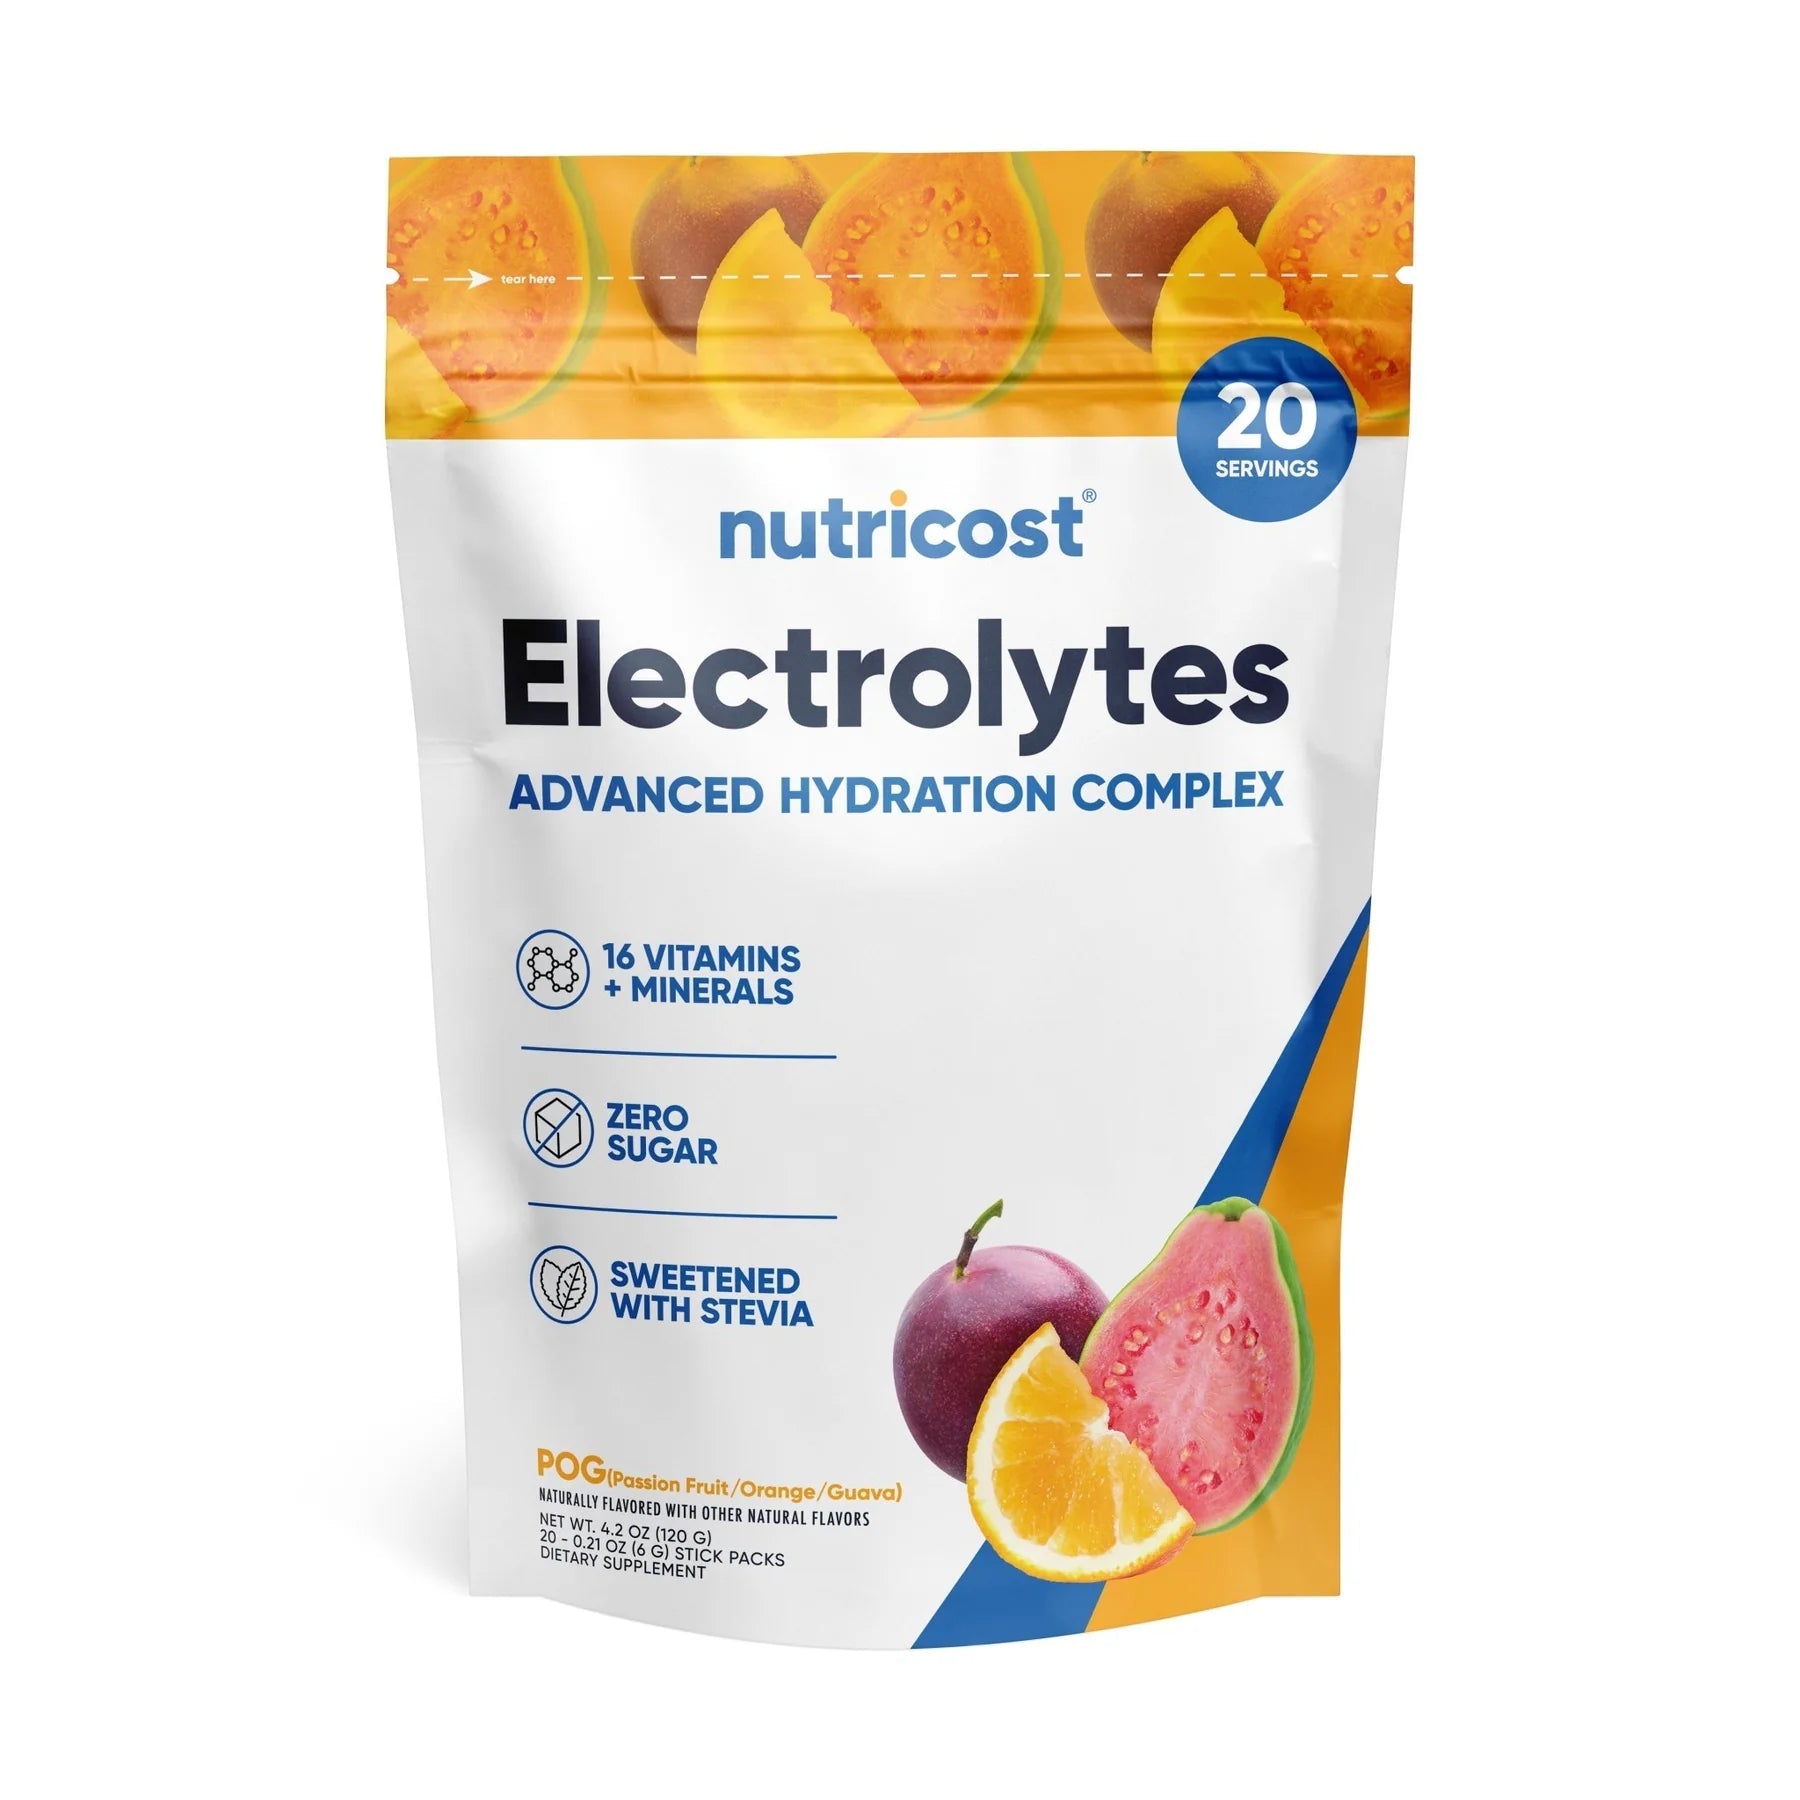 Nutricost Electrolytes Powder Hydration Packets Zero Sugar Low Calorie Keto Gluten Free 20 Packets - Passion Orange Guava